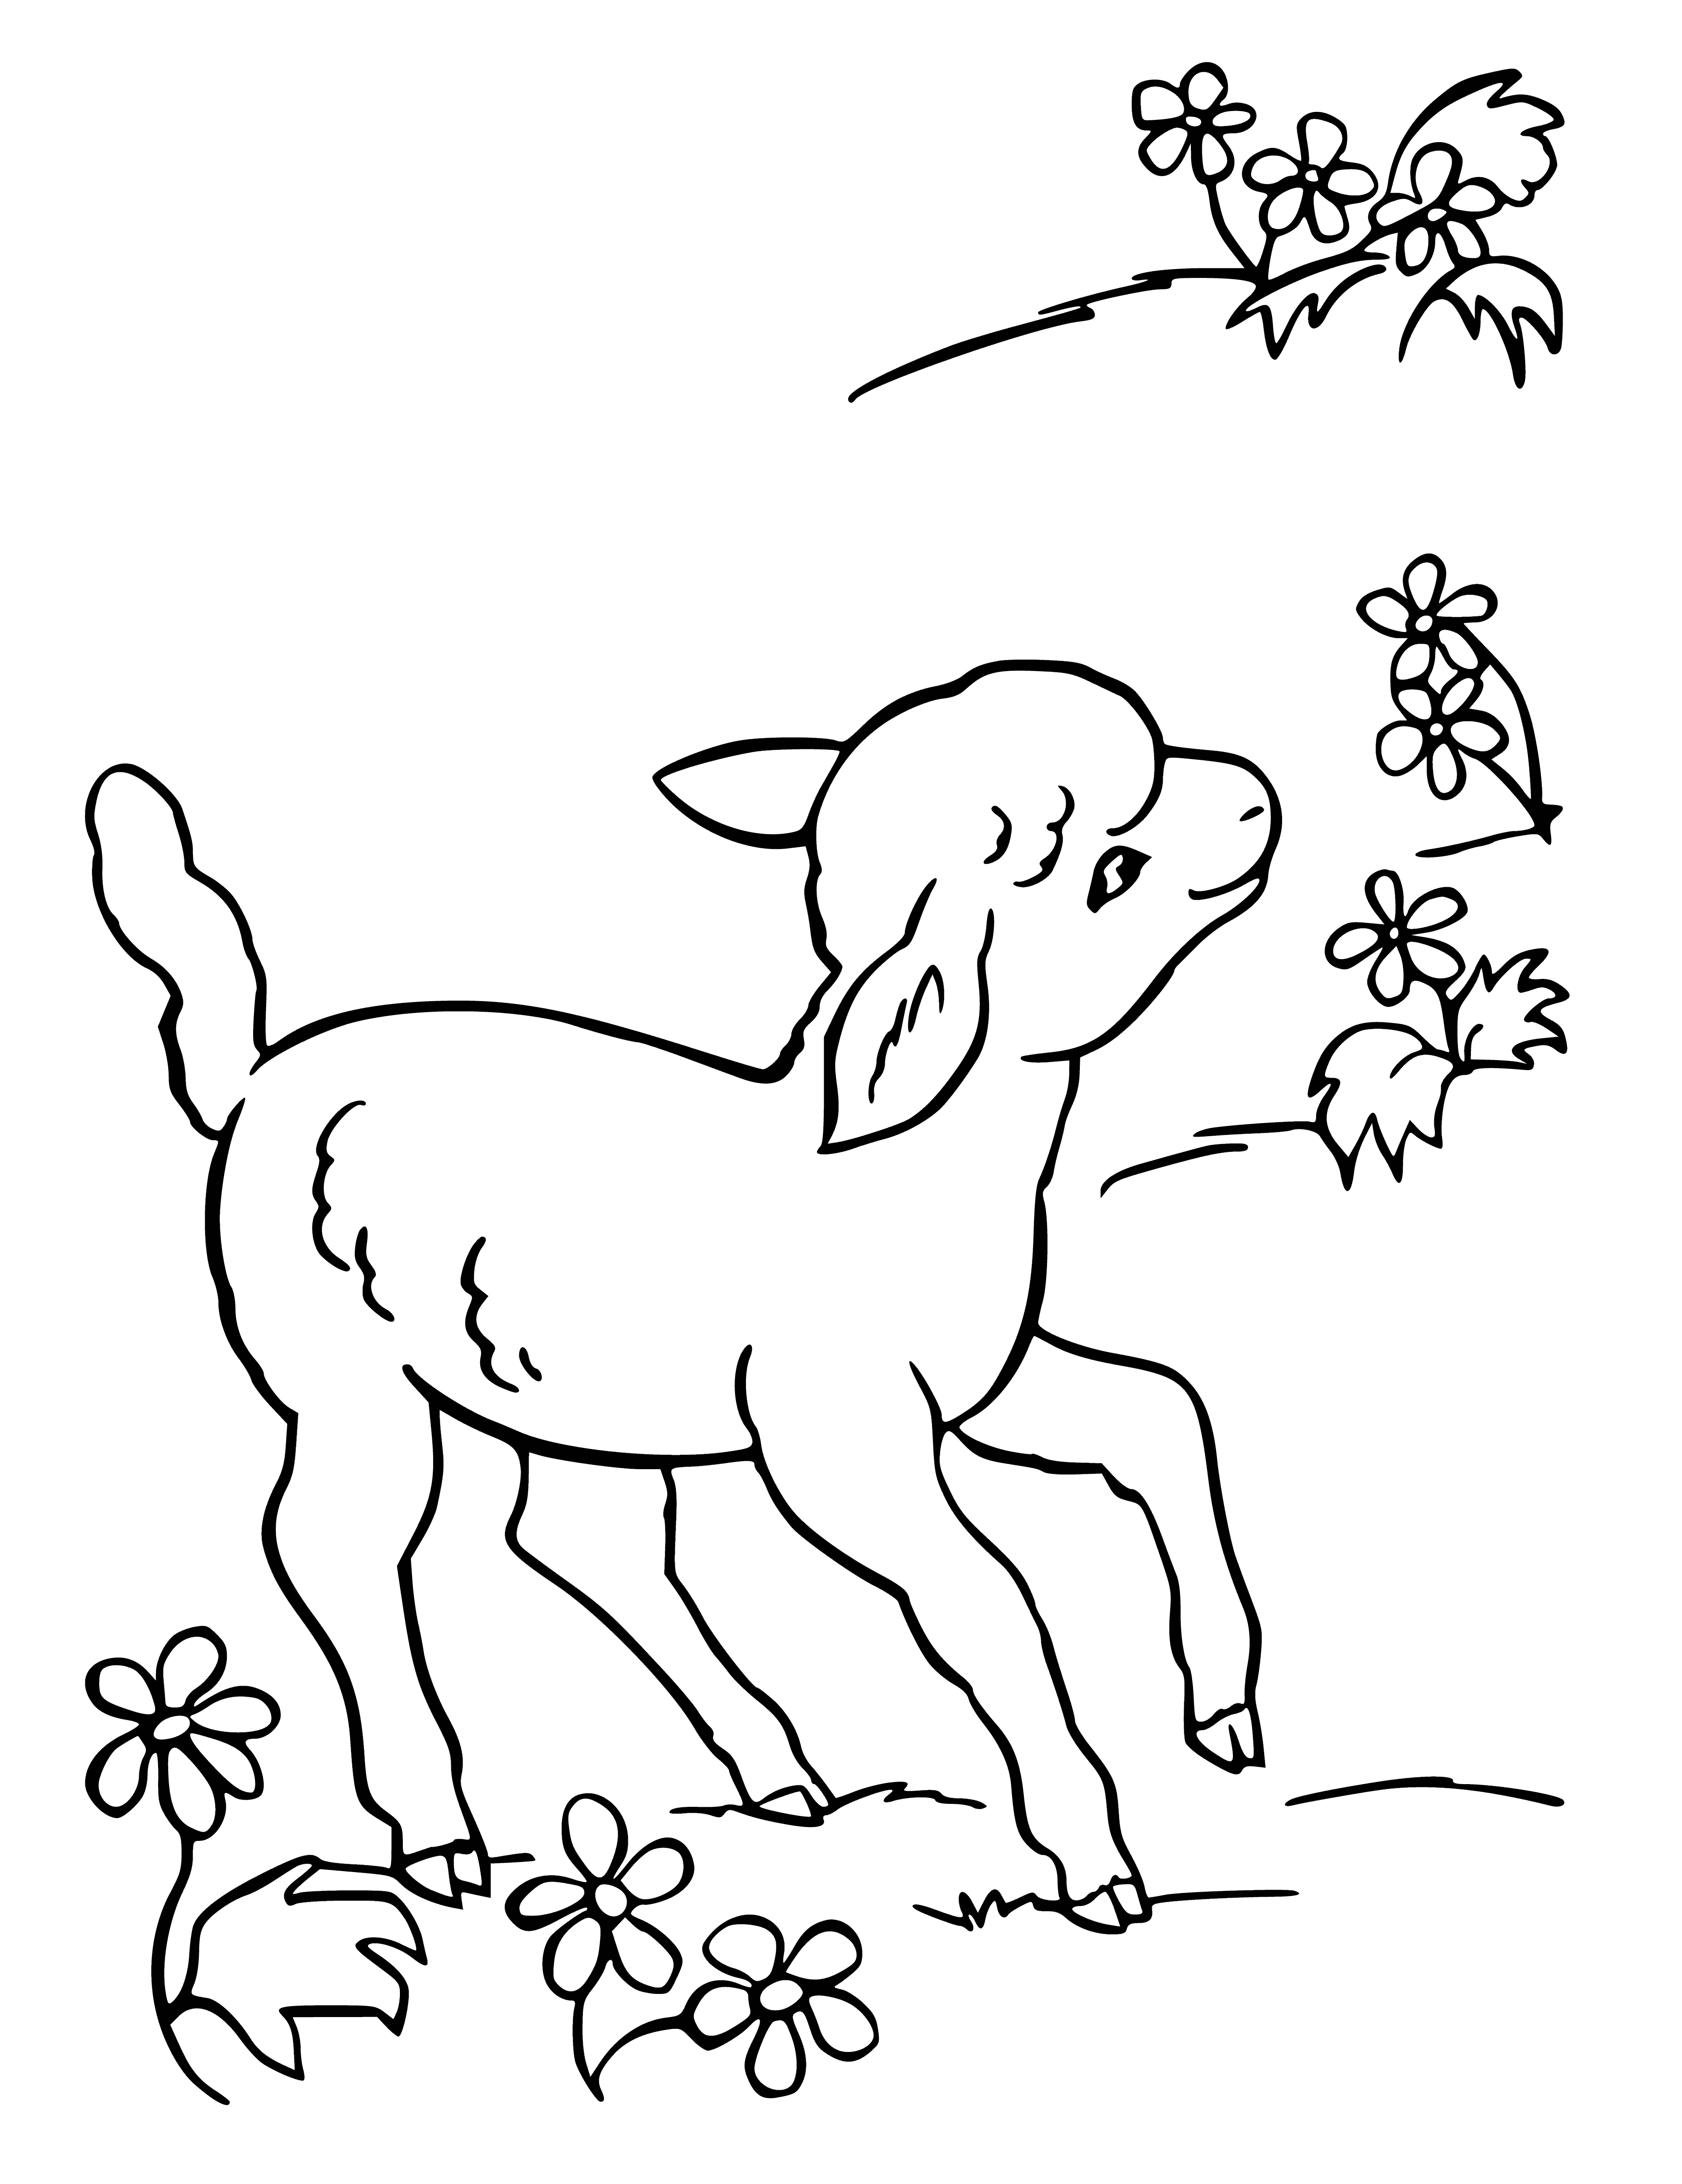 Merry sheep coloring page